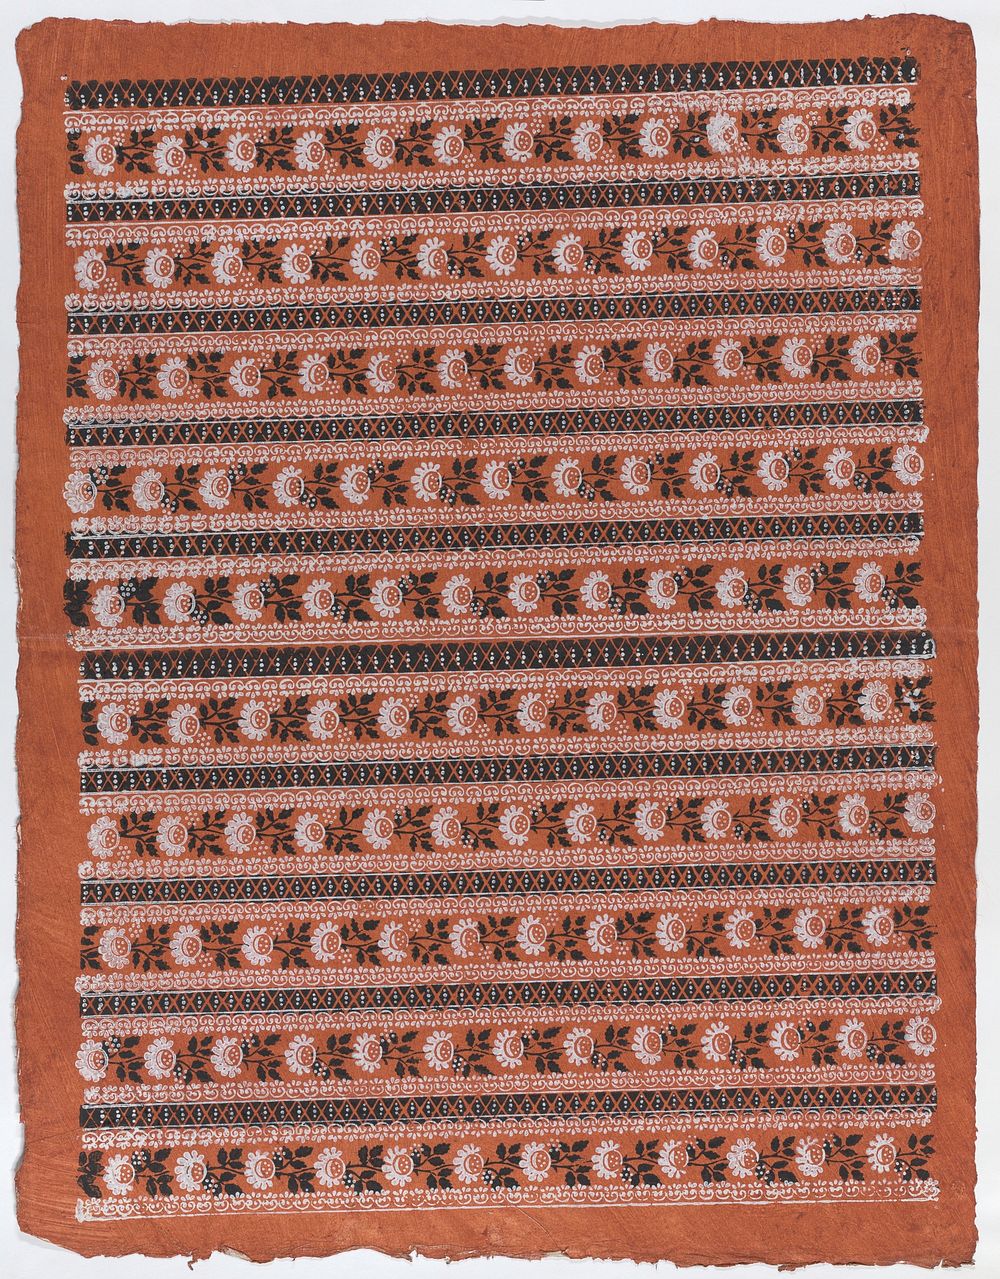 Sheet with ten borders with floral patterns on orange background